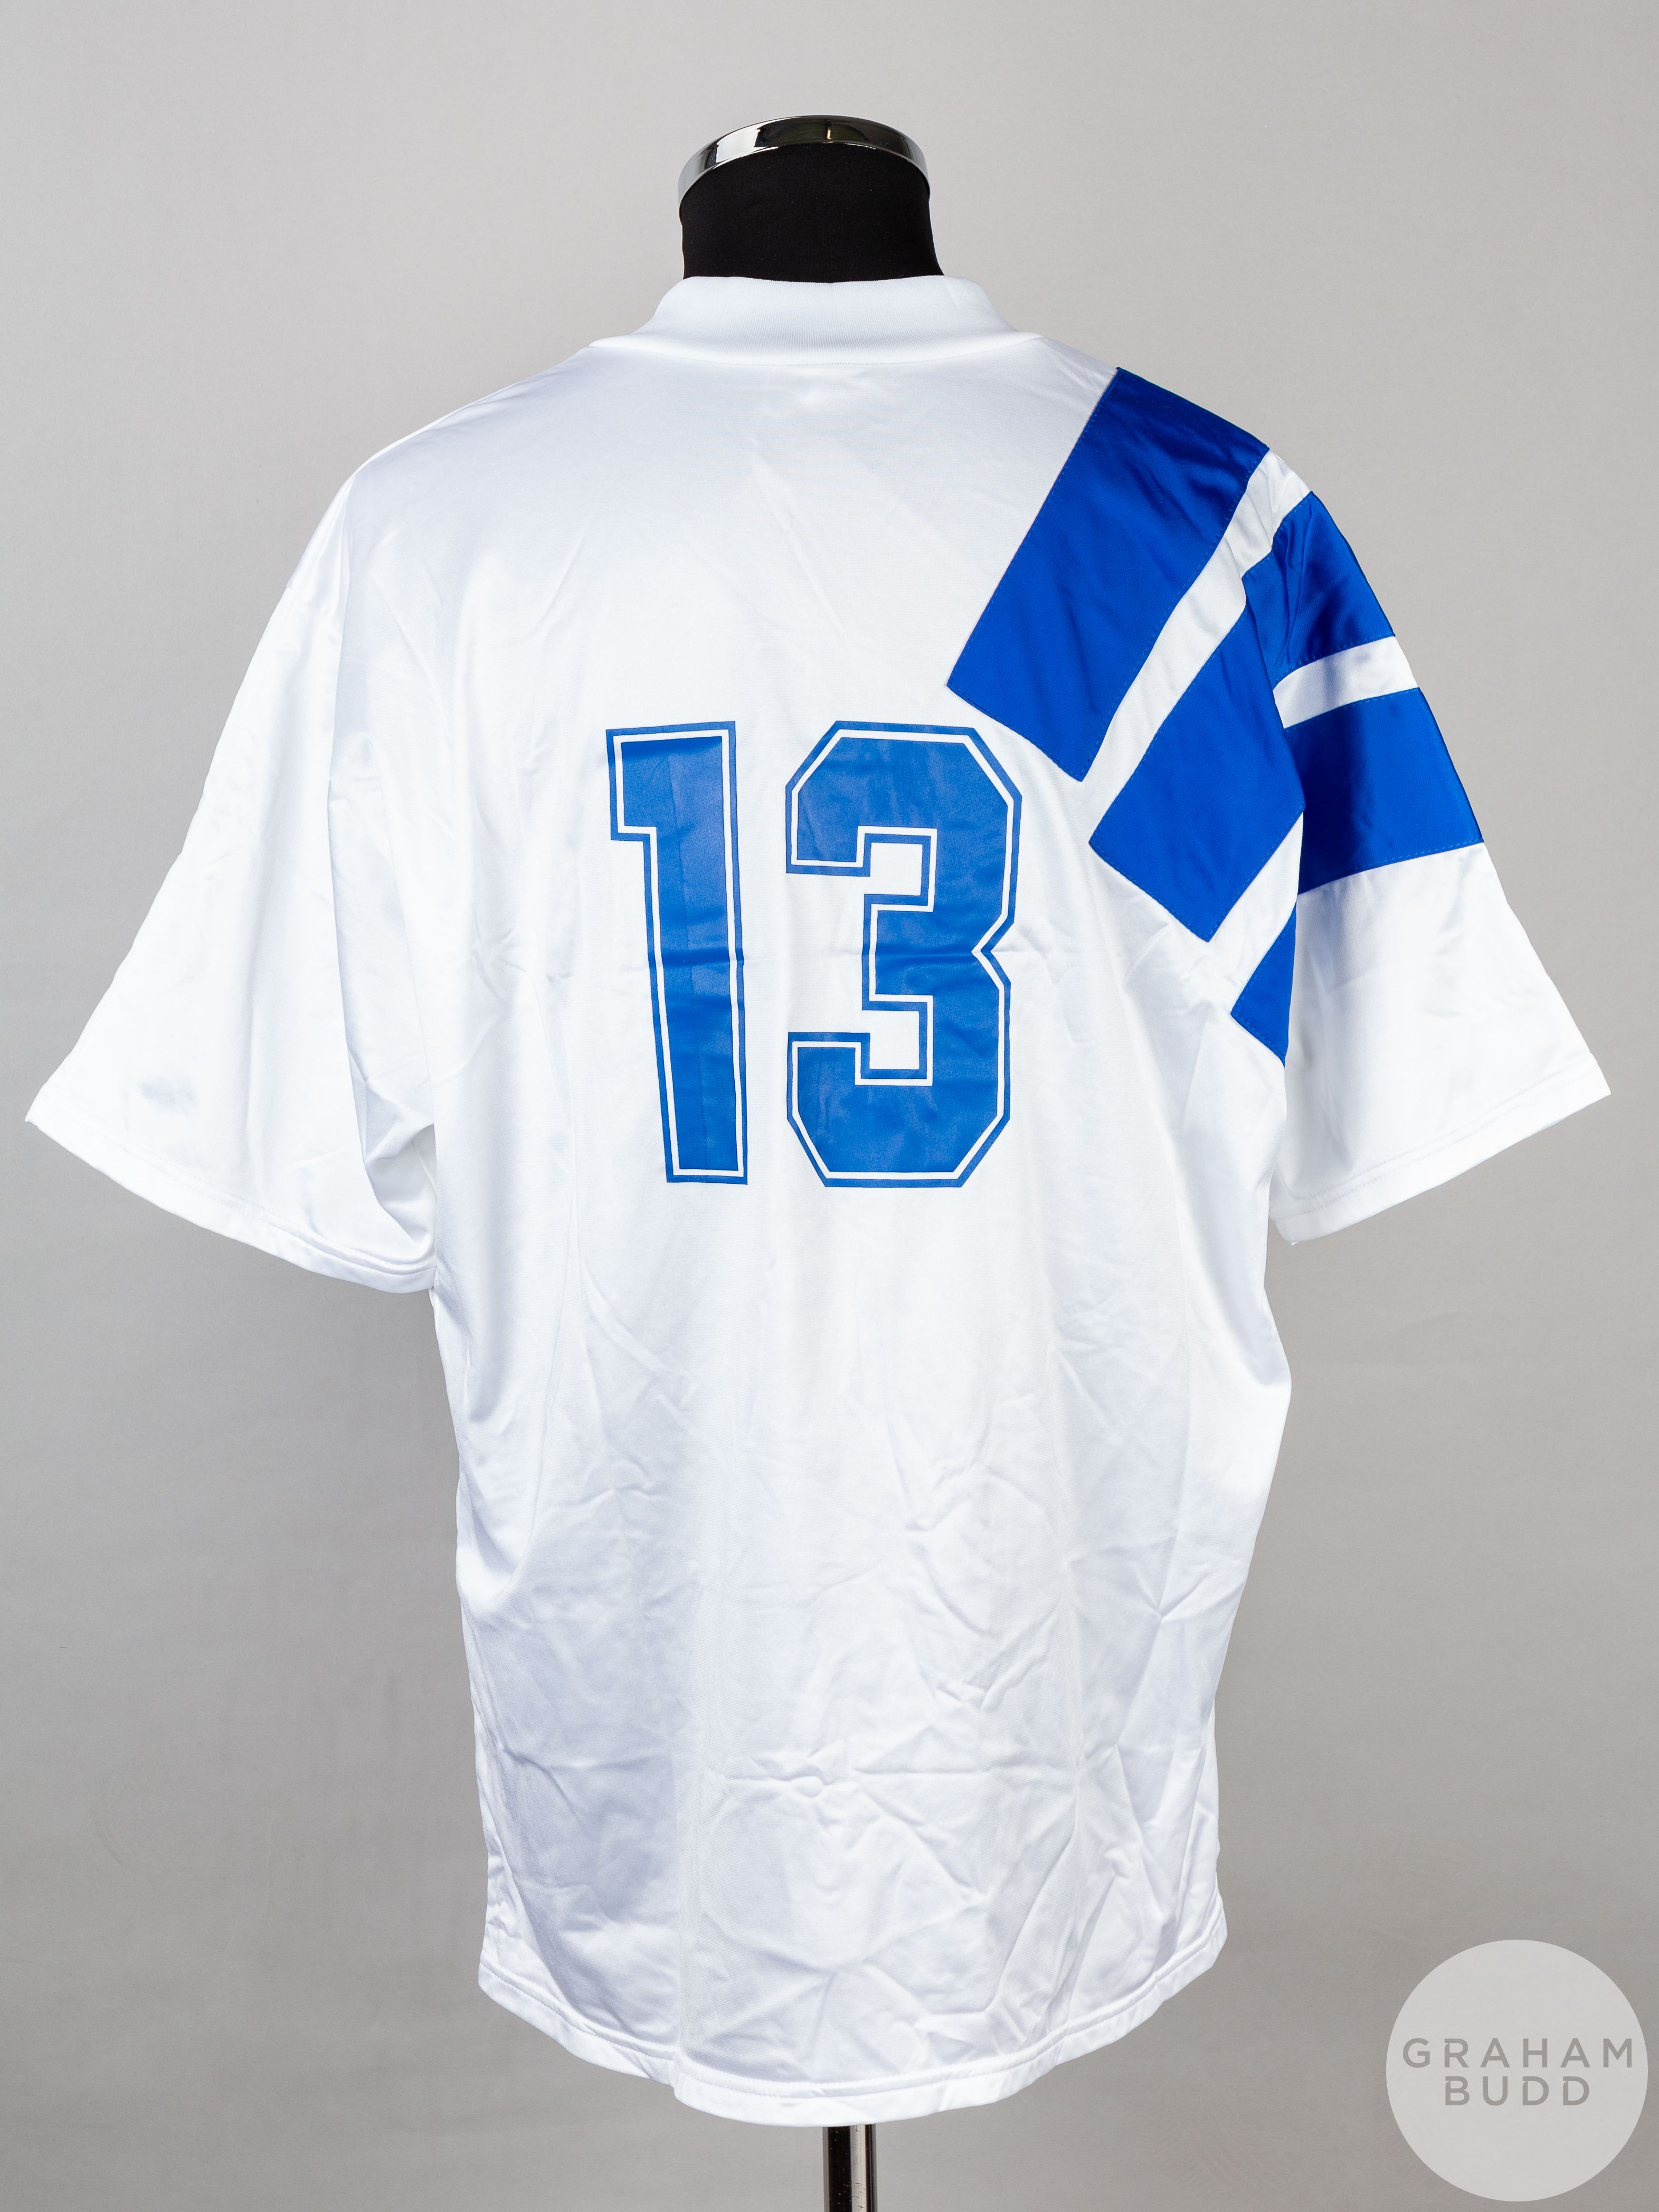 Erik Holmgren white and blue No.13 Finland match issued short-sleeved shirt - Image 2 of 4